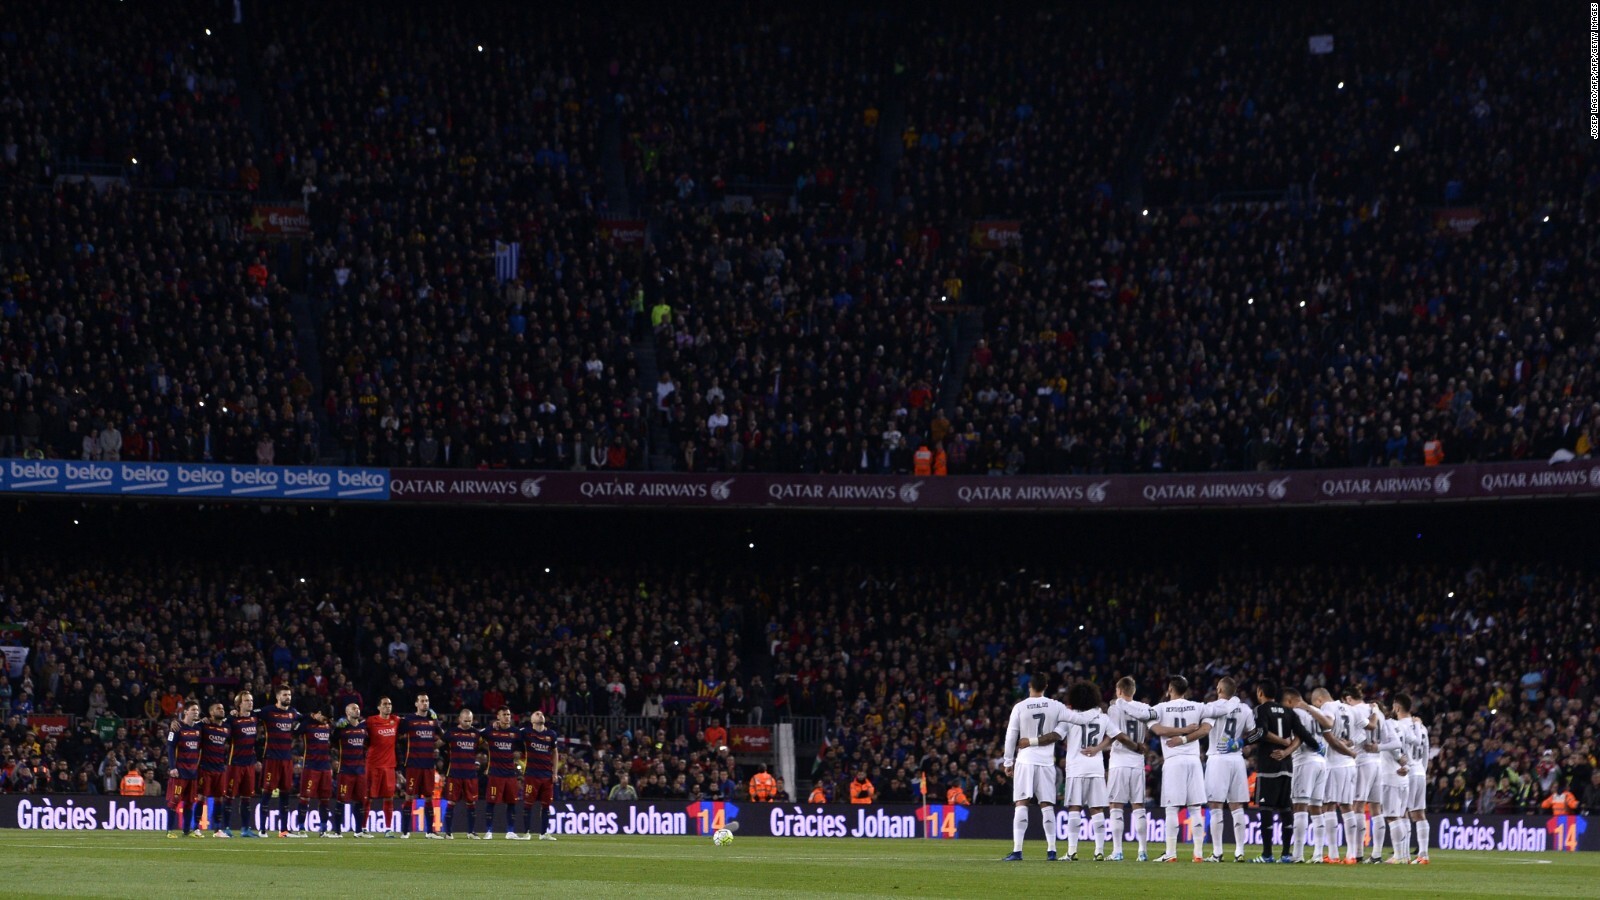 LaLiga Teams to Observe a Minute’s Silence Out of Respect for Coronavirus Victims